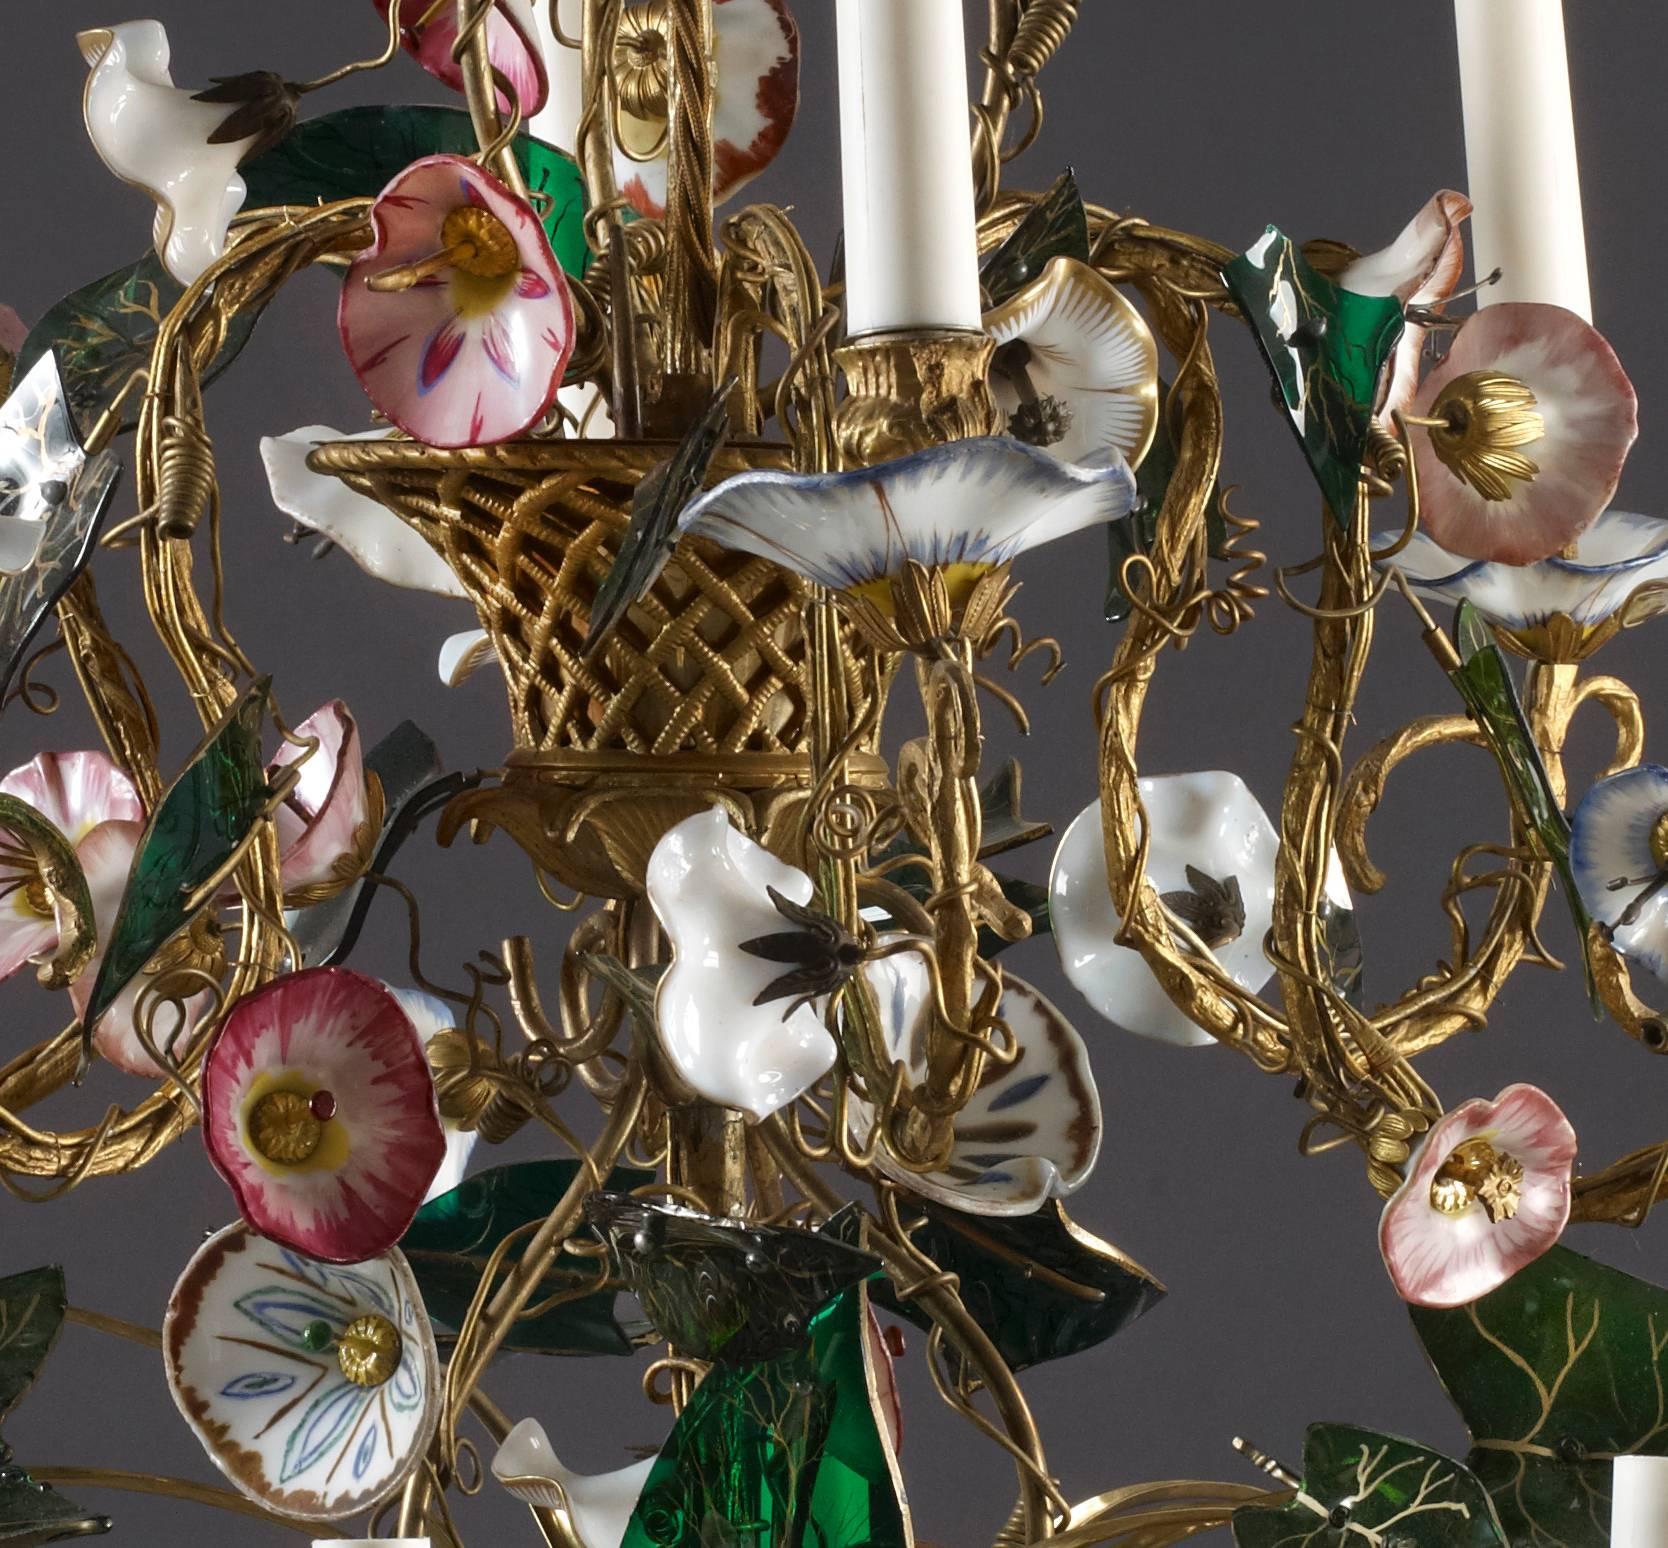 A rare two-tier Austrian chandelier with Bohemian and opaline glass flowers, the stem and arms fashioned as gilt metal vines issuing from gilded baskets, all set with boldly modeled glass vine leaves with gold veining. The convolvulus (morning